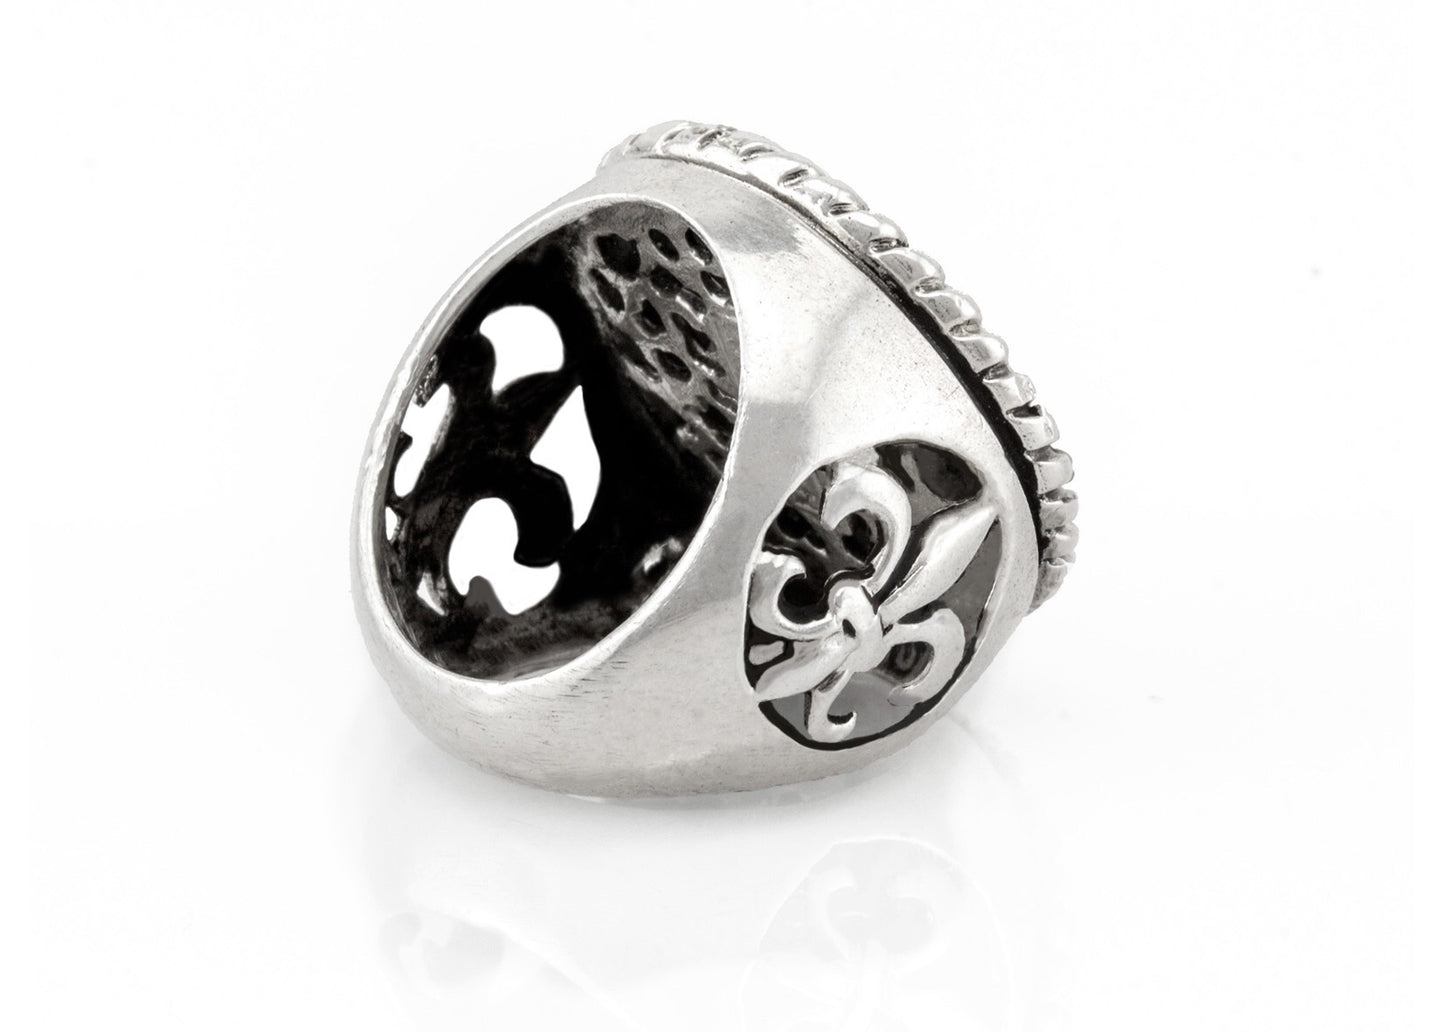 Ring with the Amen coin medallion in Hebrew on fleur de lis ring